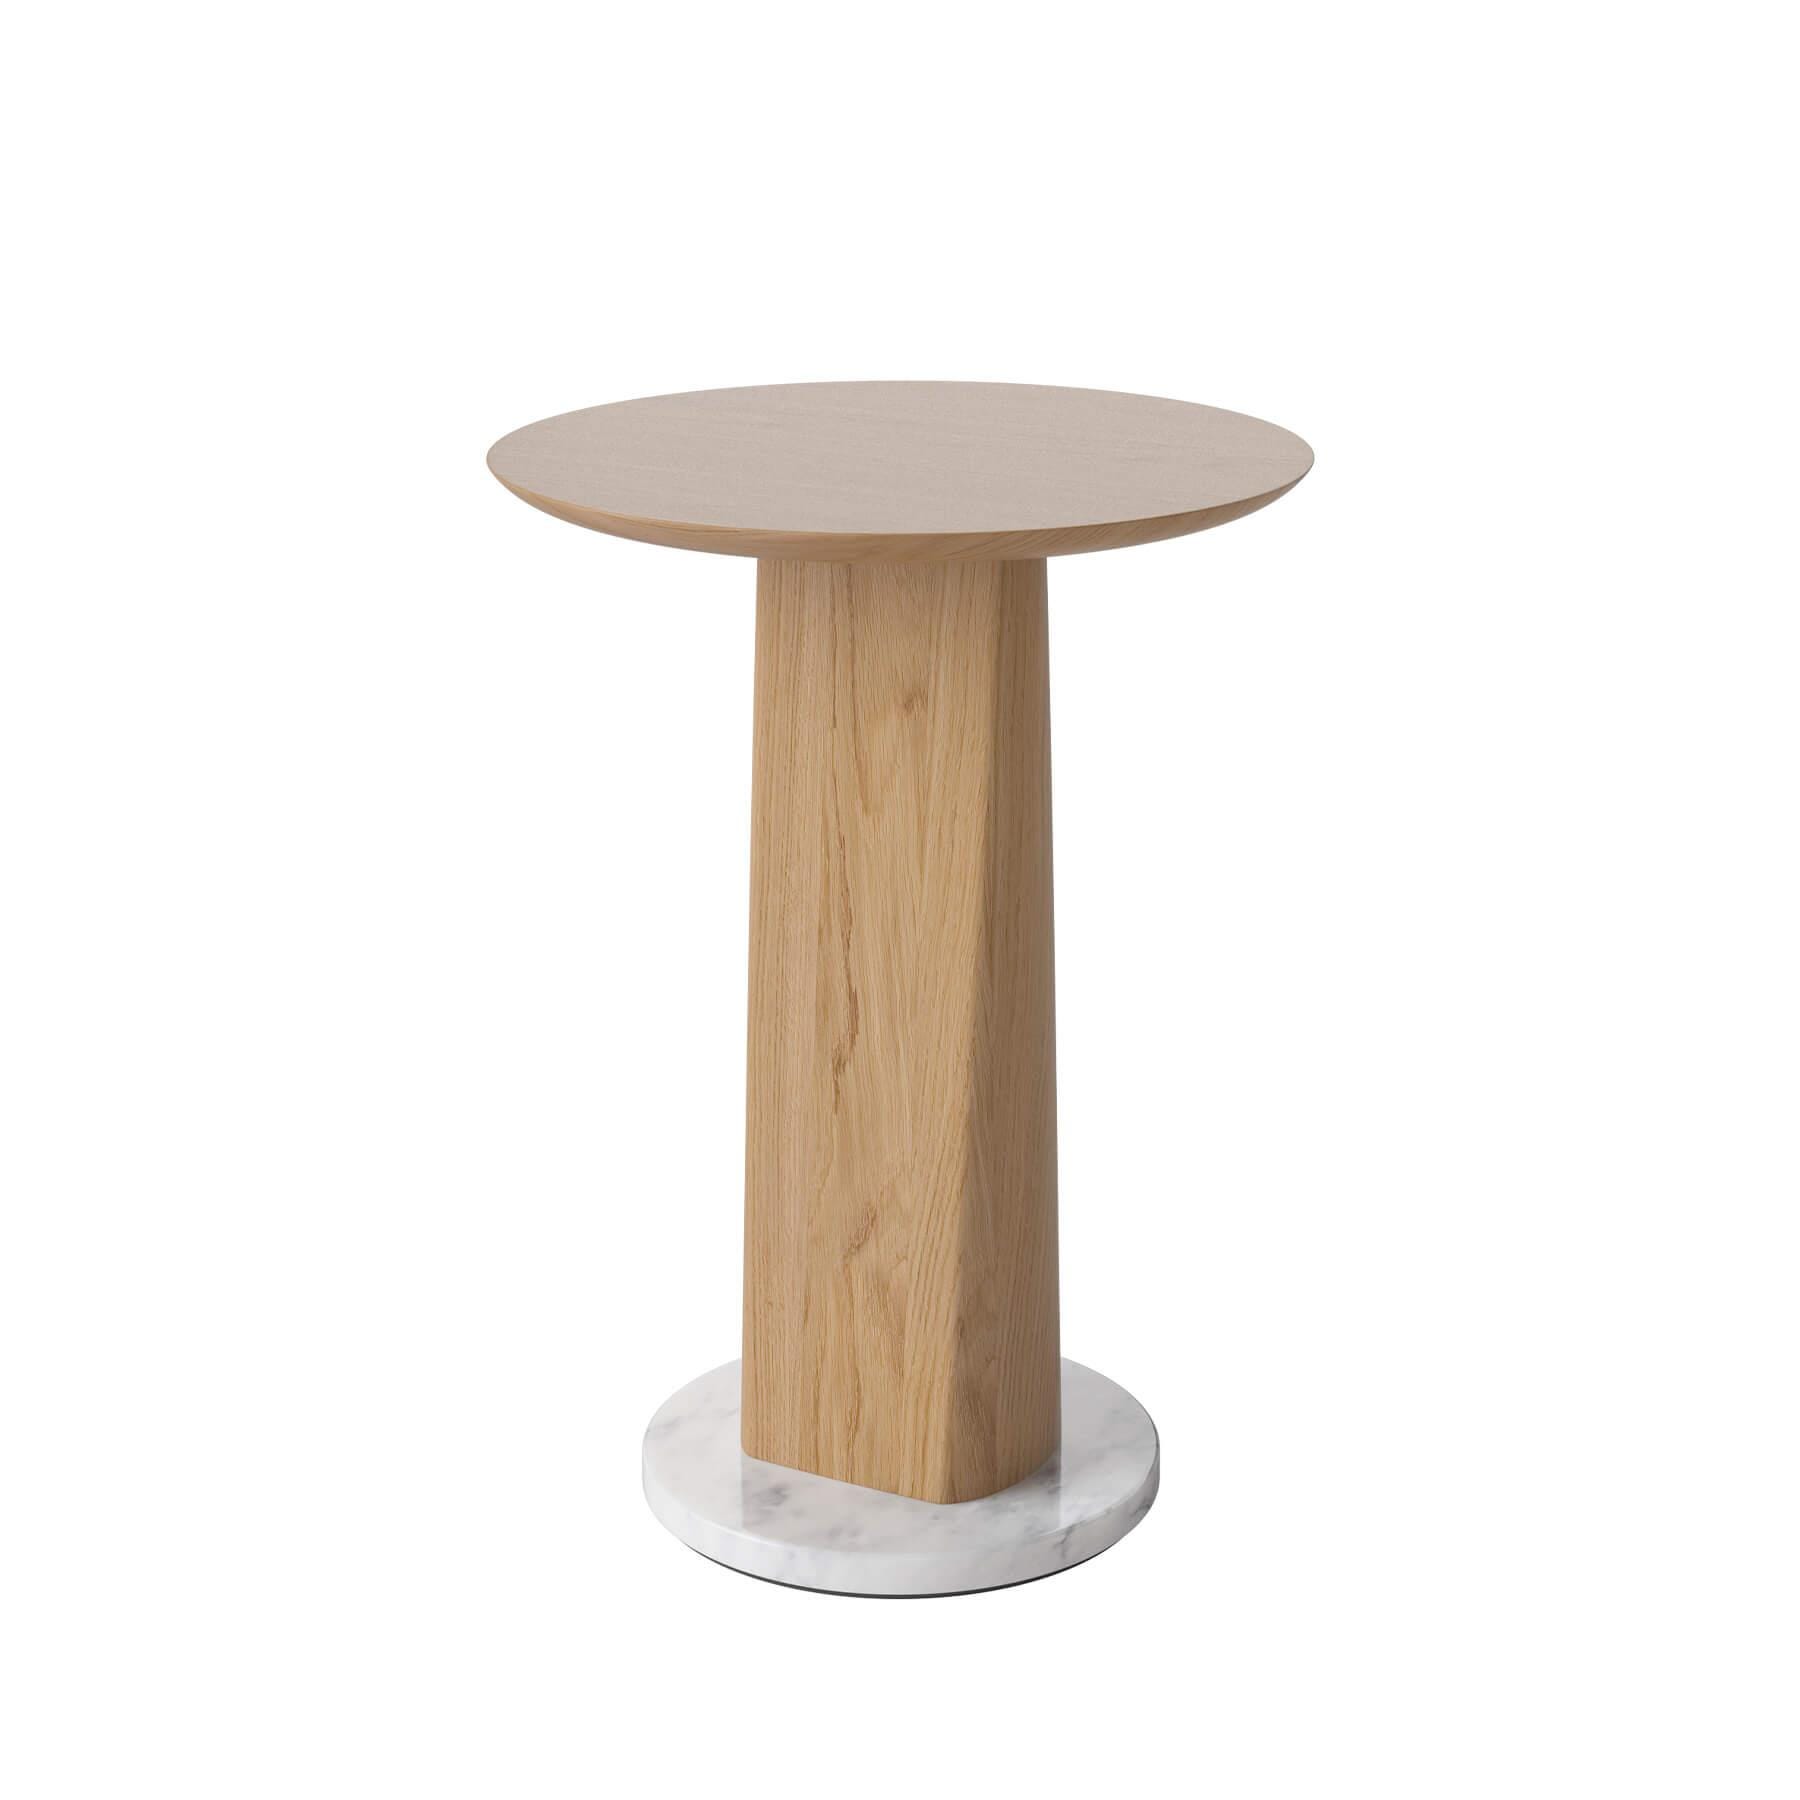 Bolia Root Side Table Small High Oiled Oak Light Wood Designer Furniture From Holloways Of Ludlow